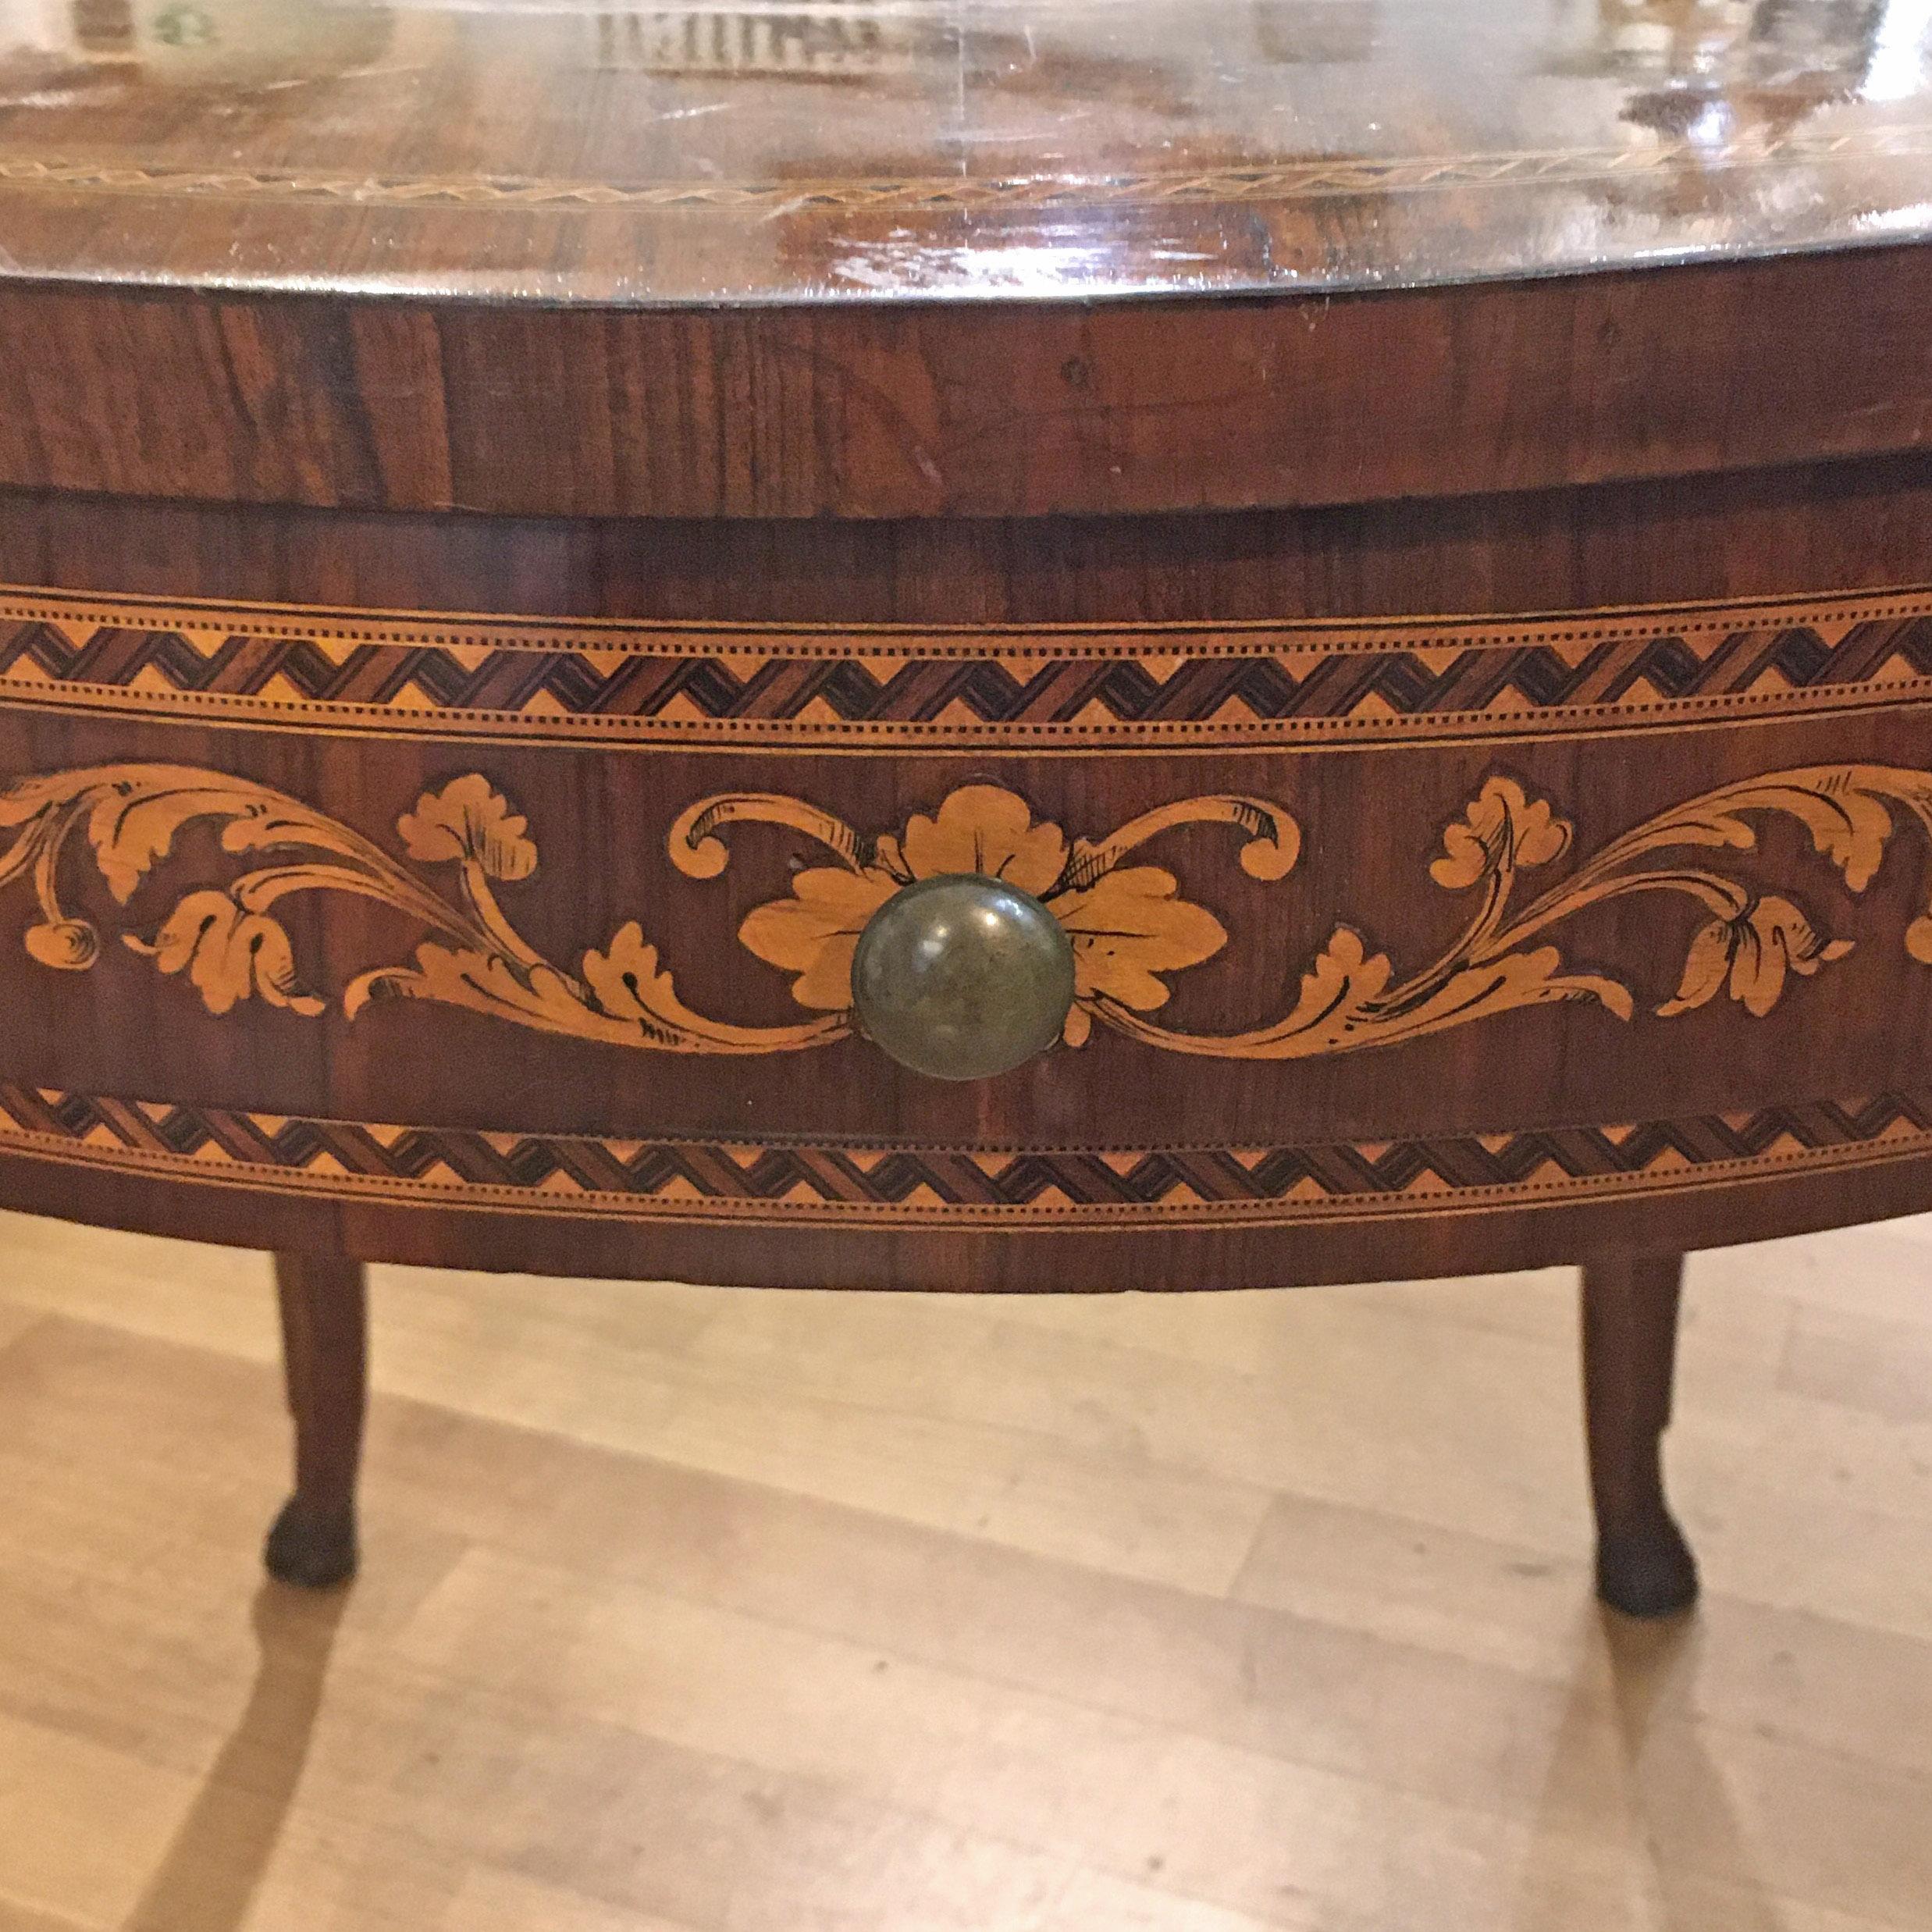 Nutwood EARLY 19th CENTURY TUSCAN DIRECTORIO TABLE IN WALNUT AND FRUIT WOOD For Sale